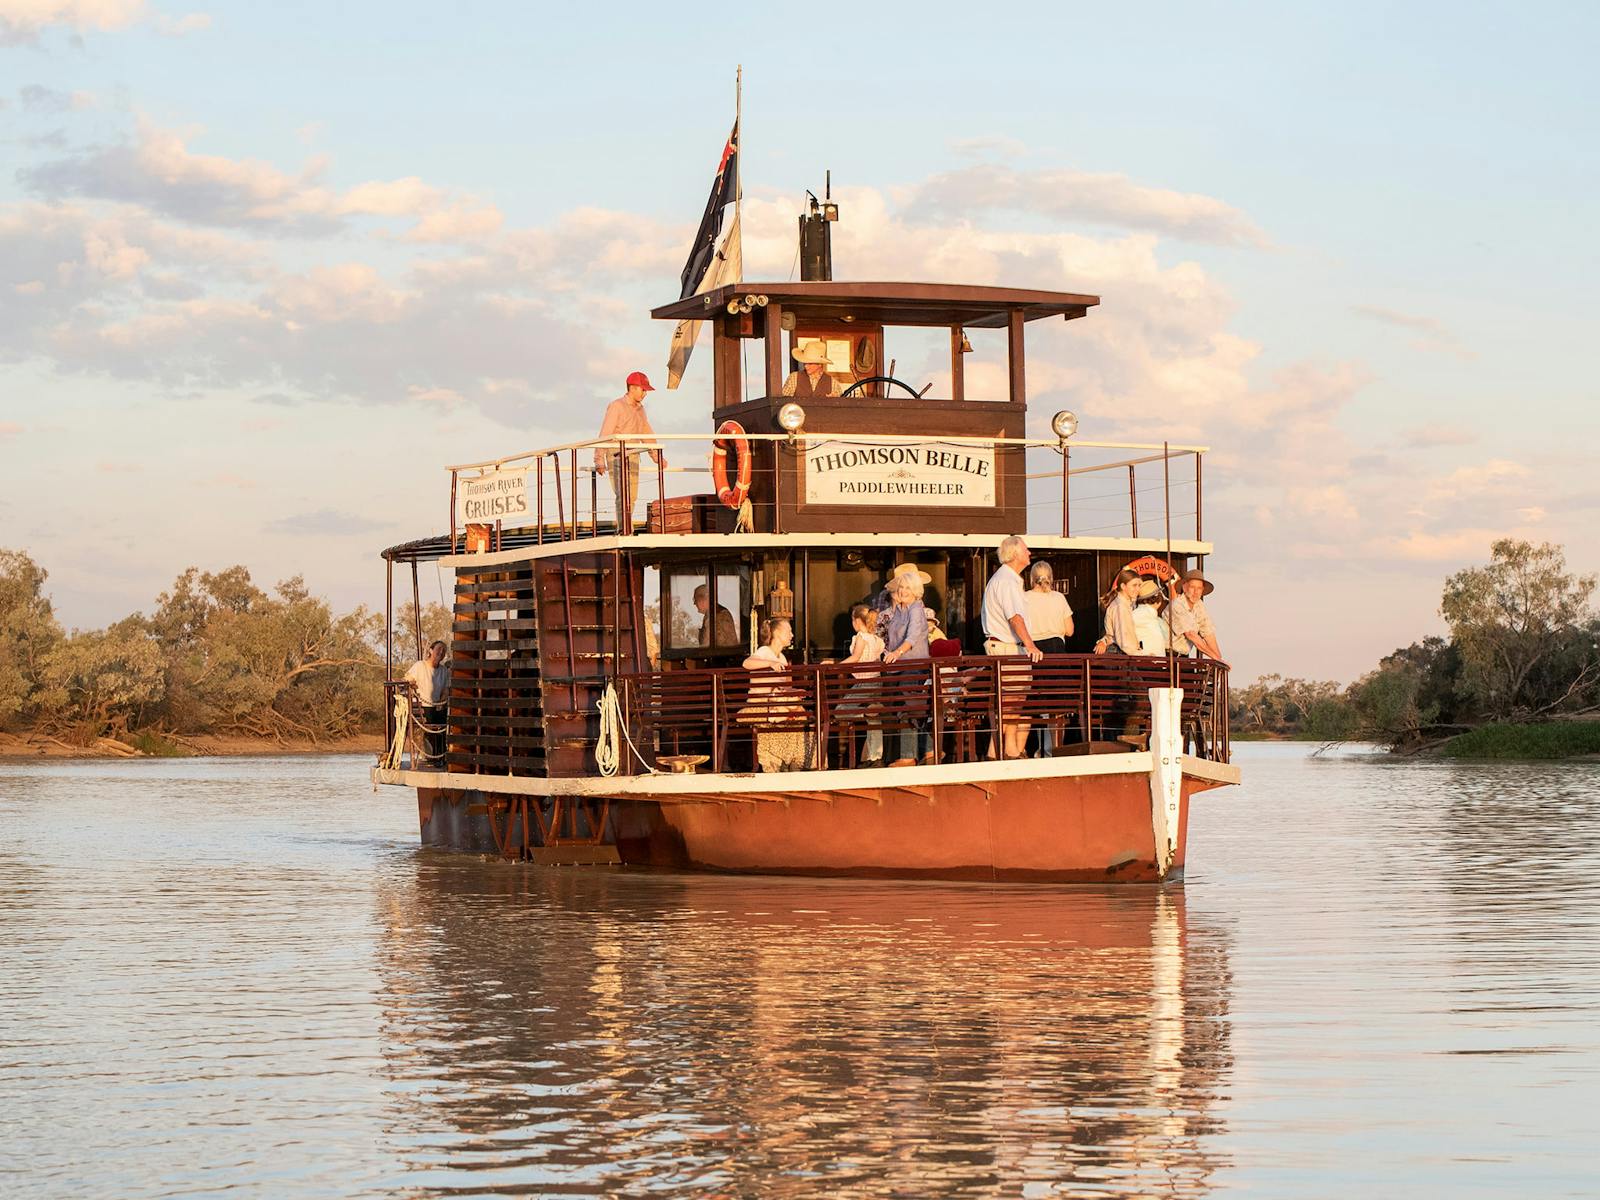 The Thomson Belle paddlewheeler on the Thomson River